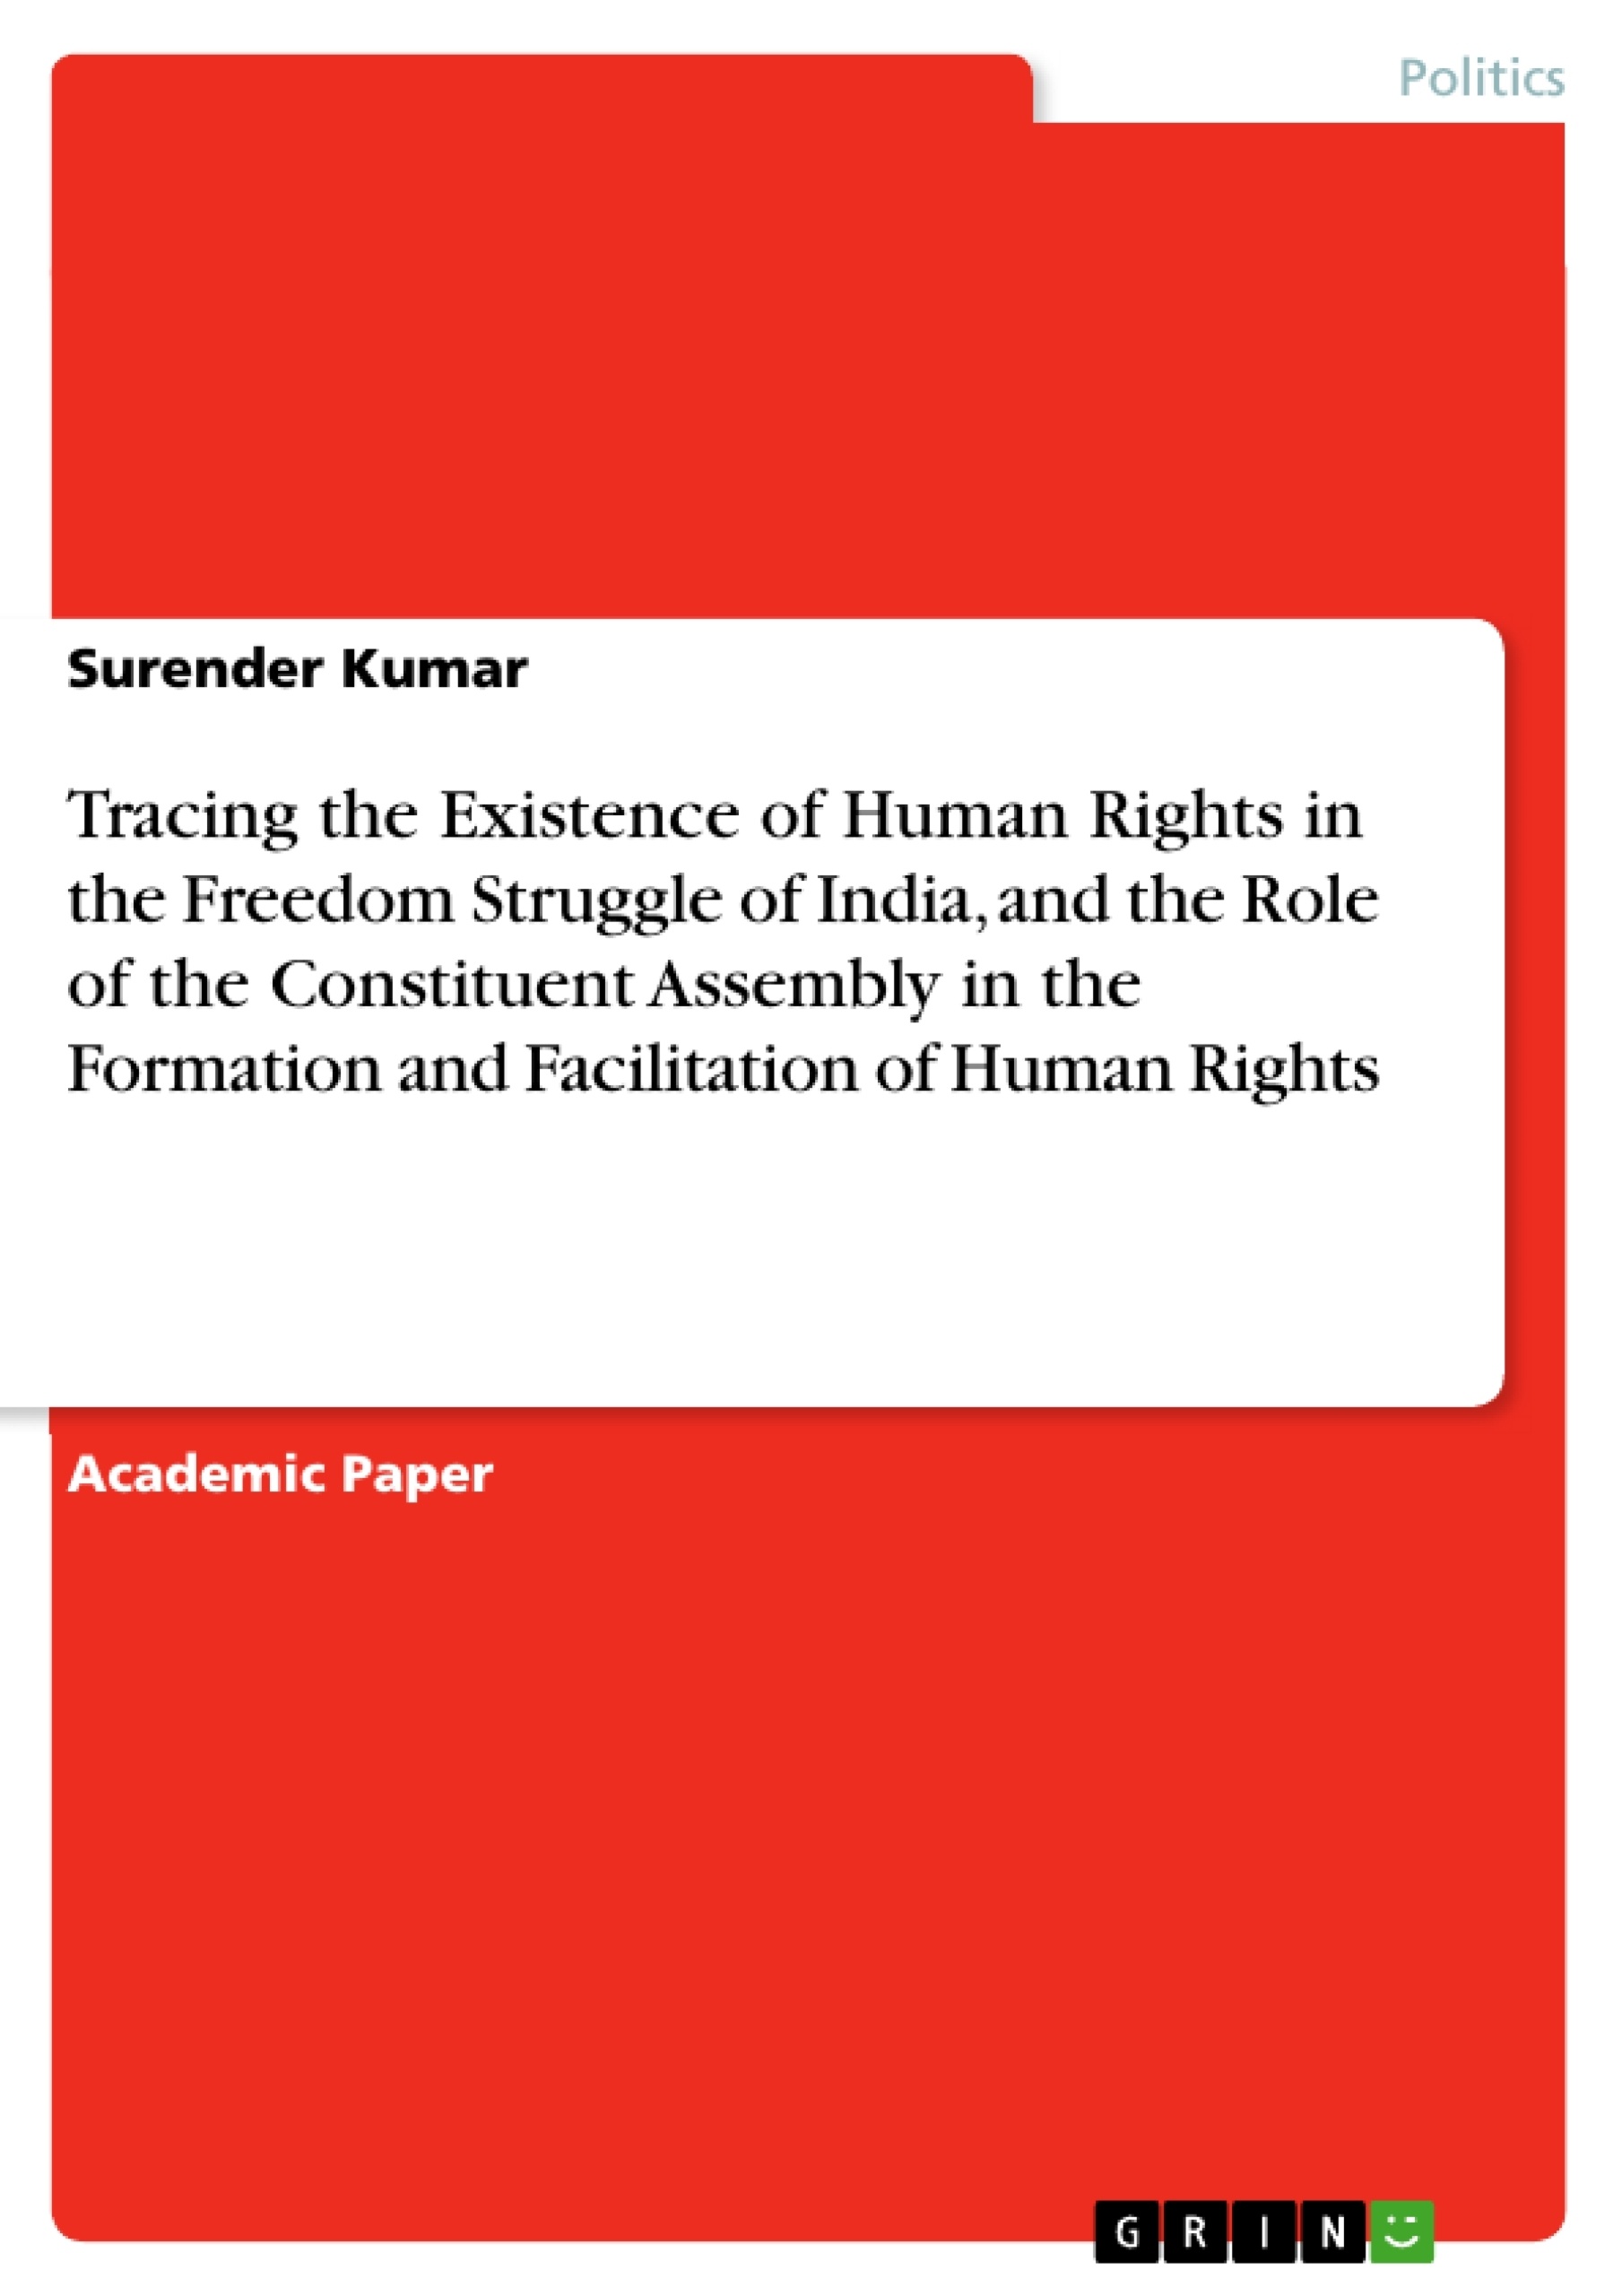 Titel: Tracing the Existence of Human Rights in the Freedom Struggle of India, and the Role of the Constituent Assembly in the Formation and Facilitation of Human Rights